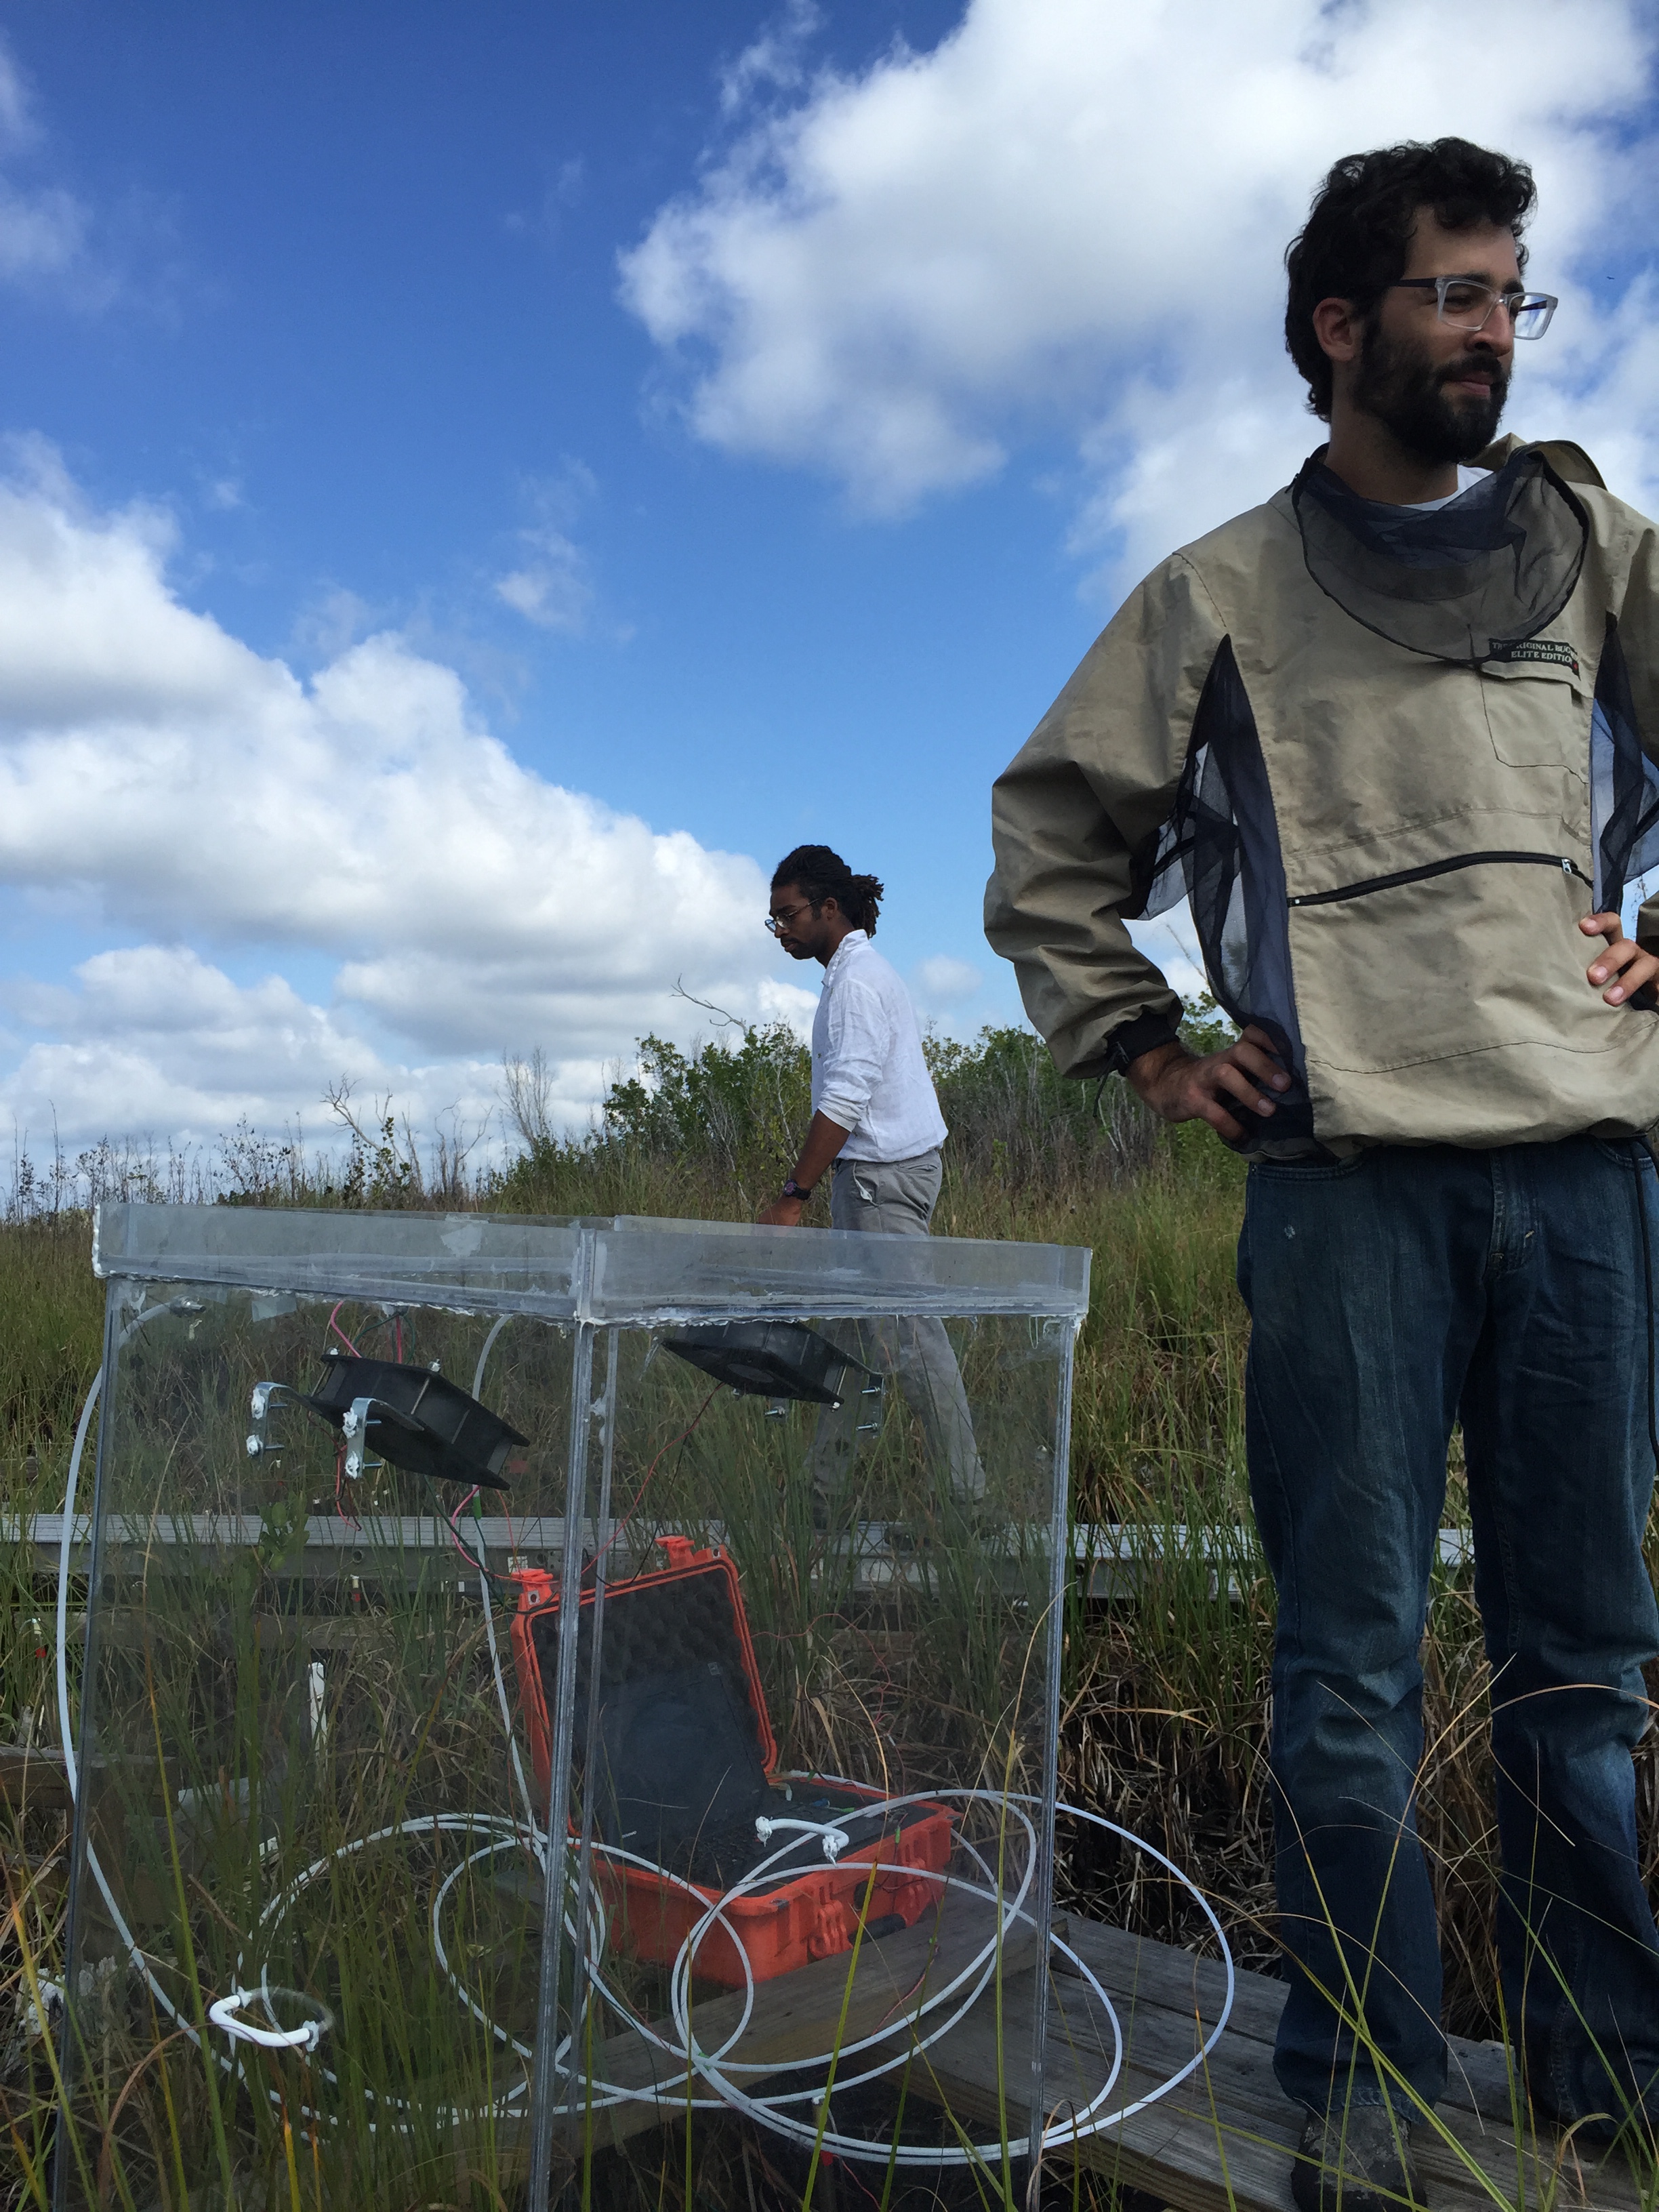 FCE researchers (Ben Wilson and Shawn Abrahams) collecting carbon flux measurements at a brackish water site